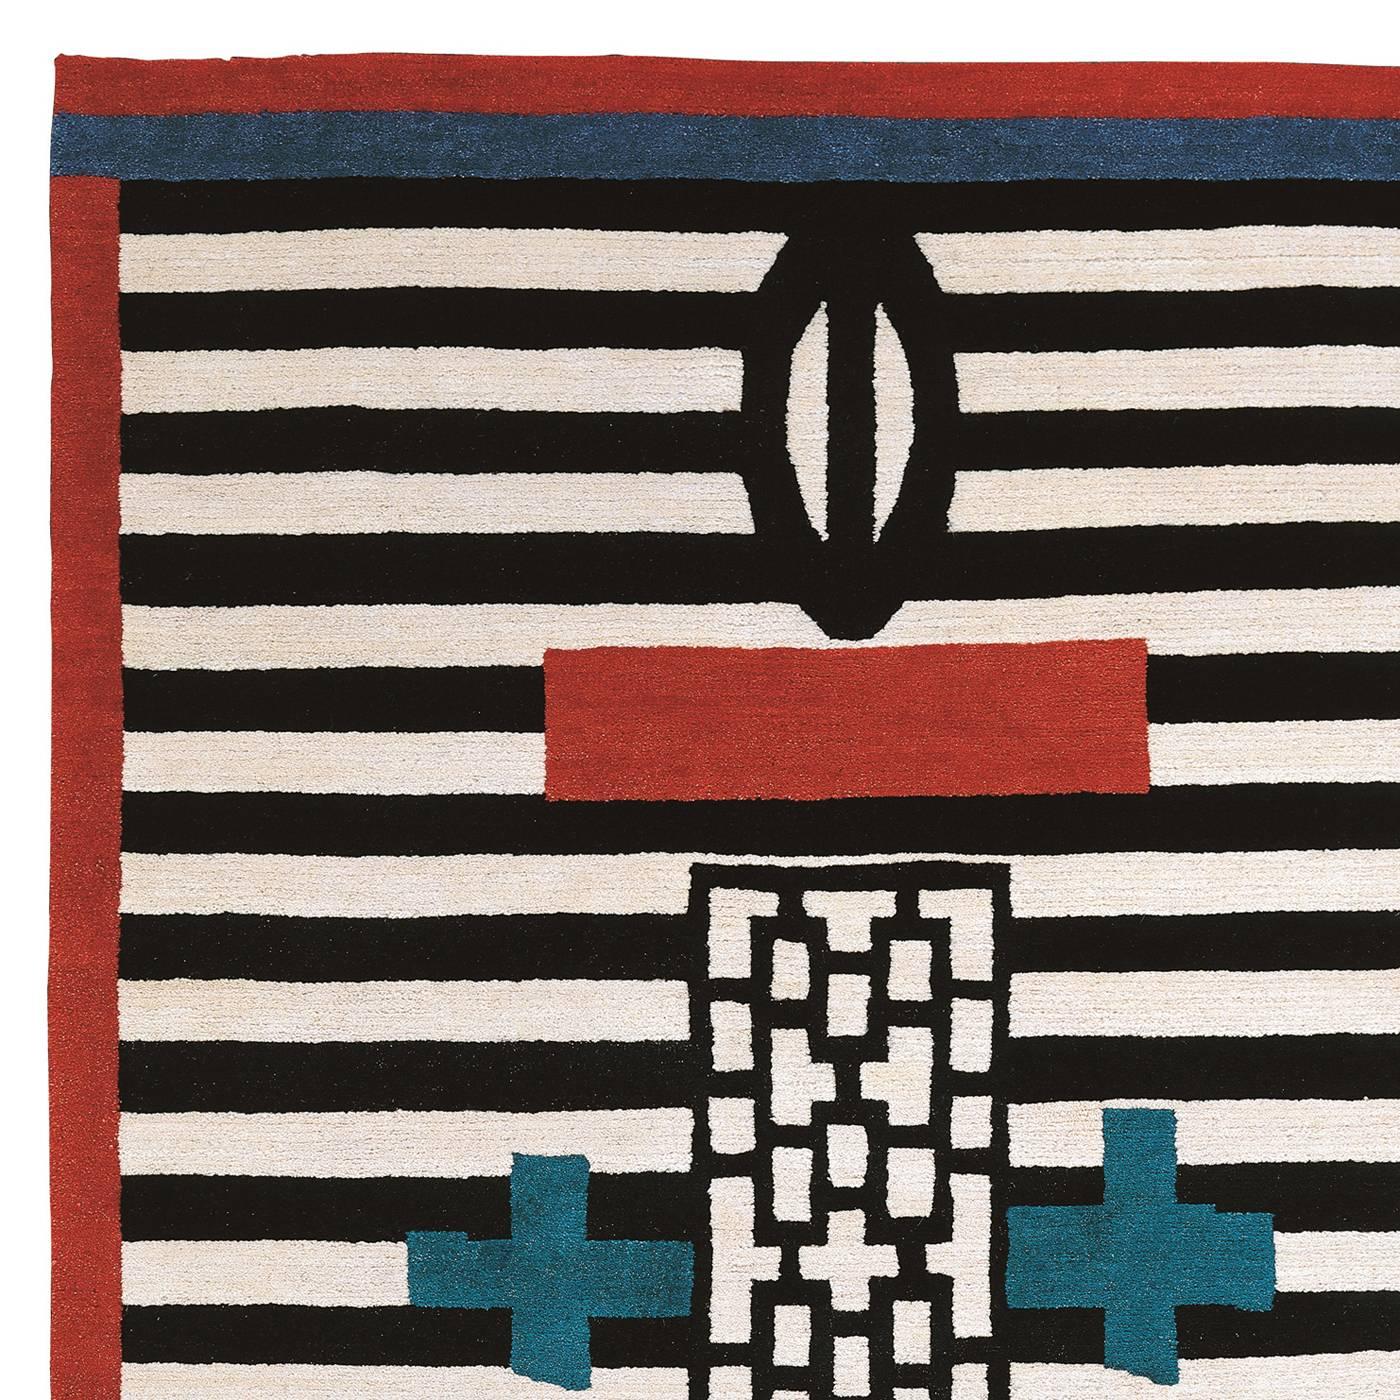 Designed by Nathalie Du Pasquier for Post Design, this striking carpet uses modern decorative patterns in the timeless color combination of black and white with accents in red and blue. The result is a modern piece, part of a limited series of 36,